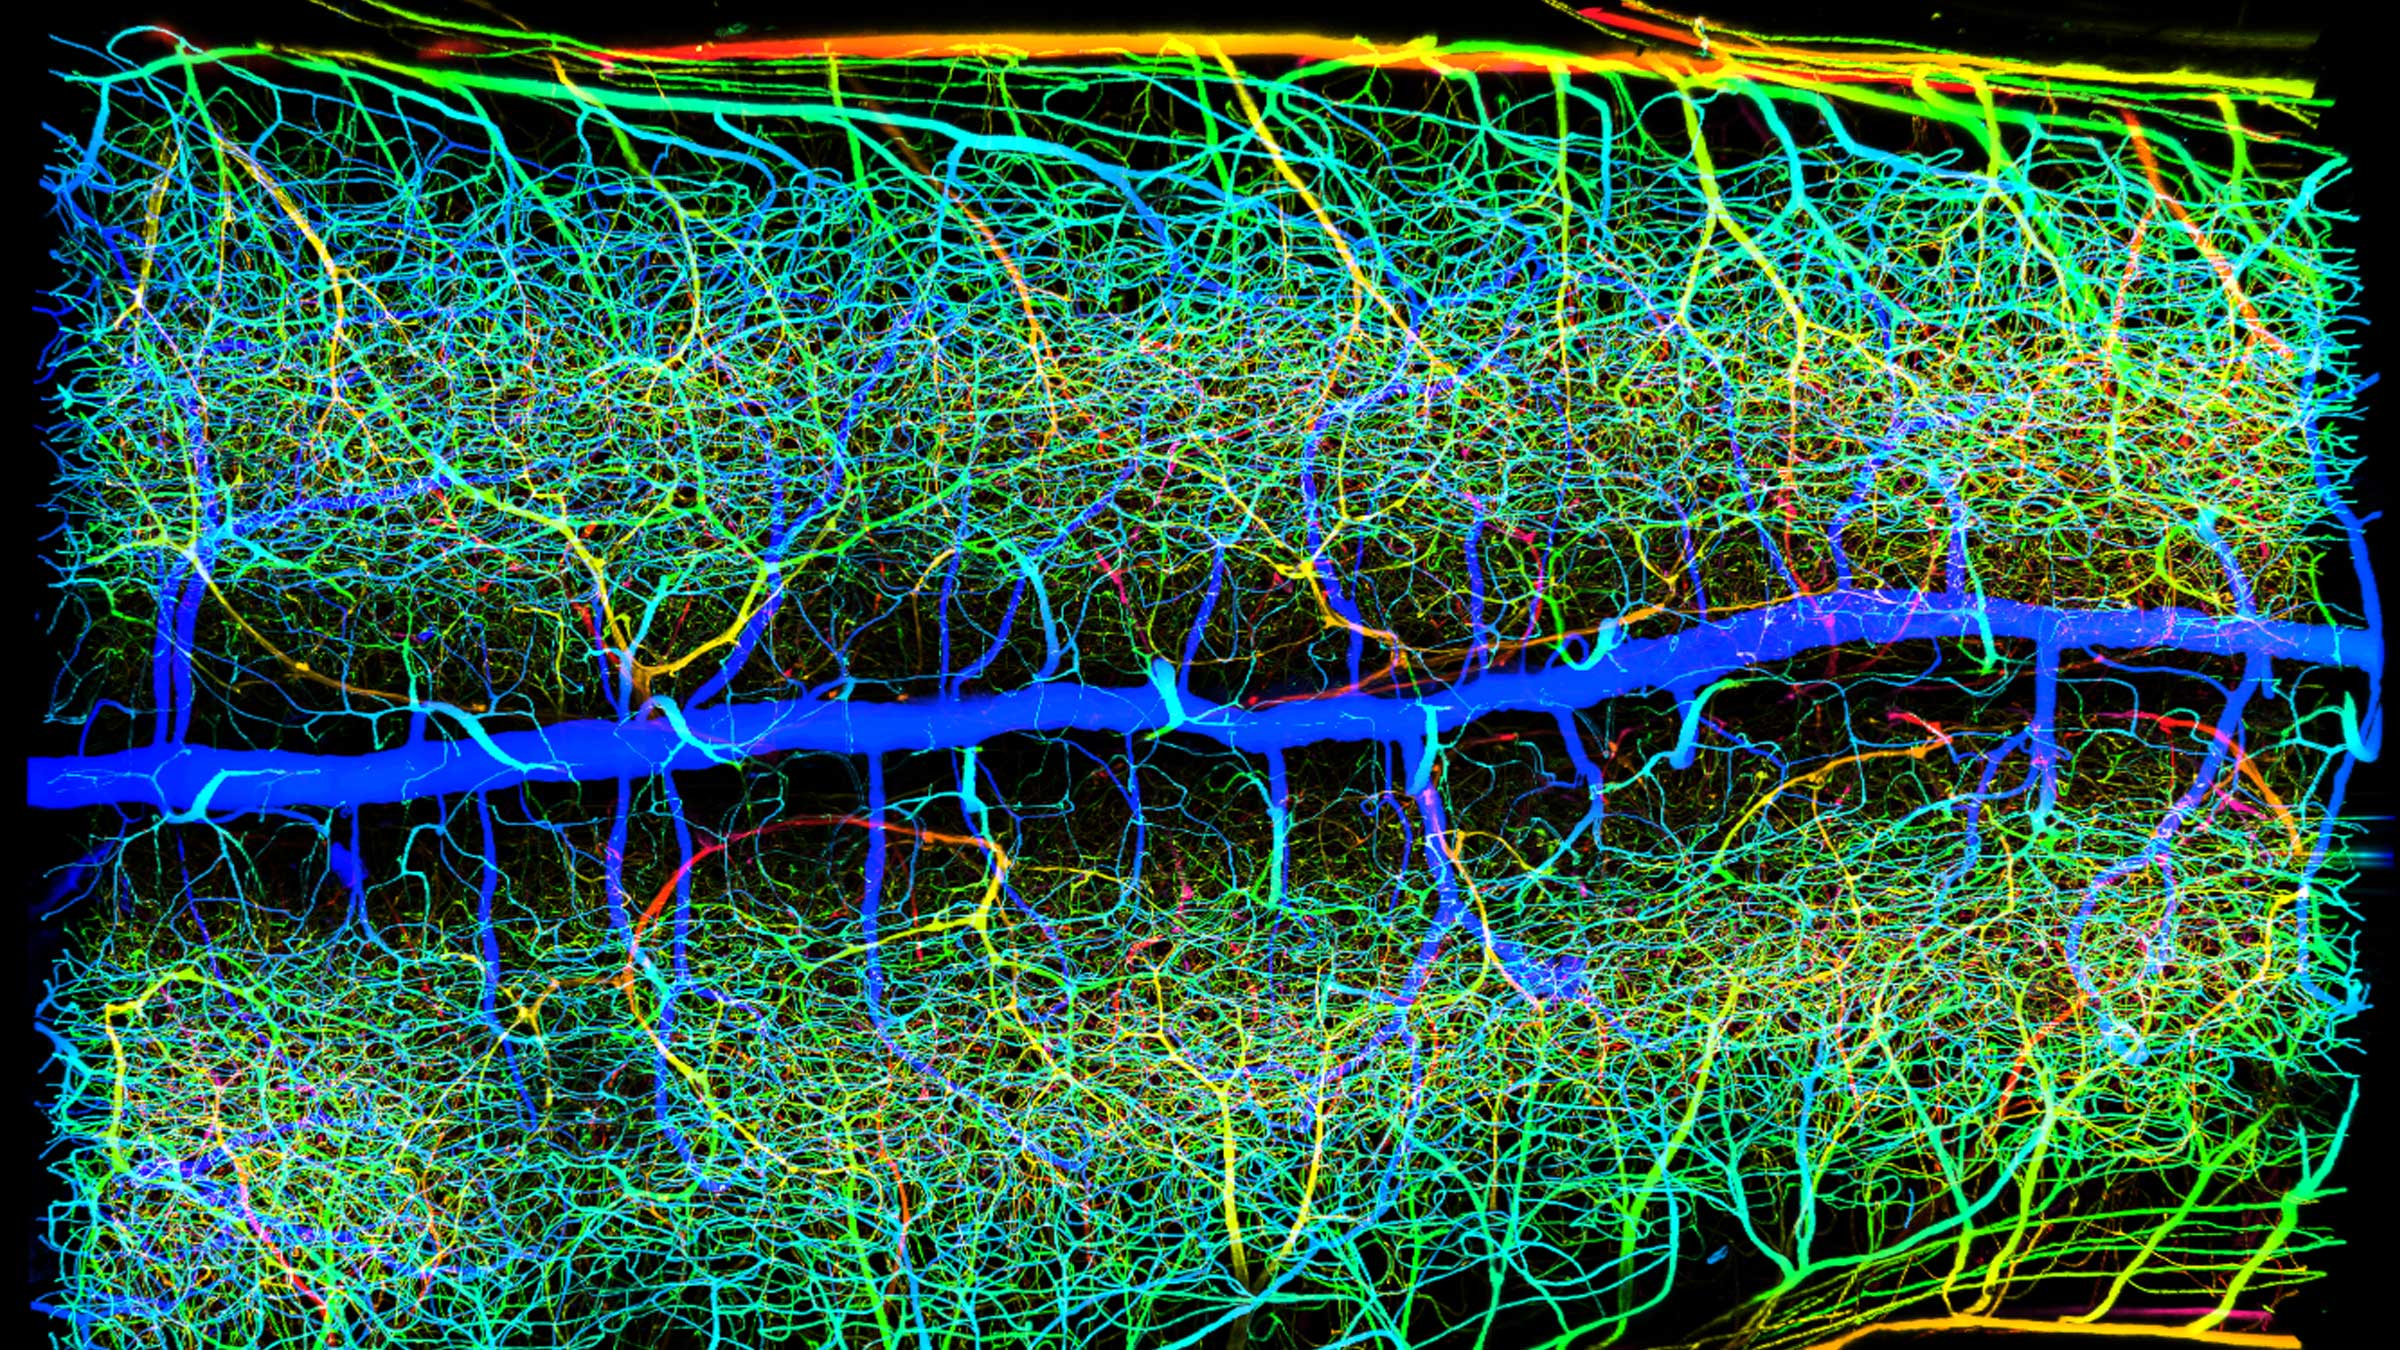 Microimaging of the vasculature network in the spinal cord of an adult mouse